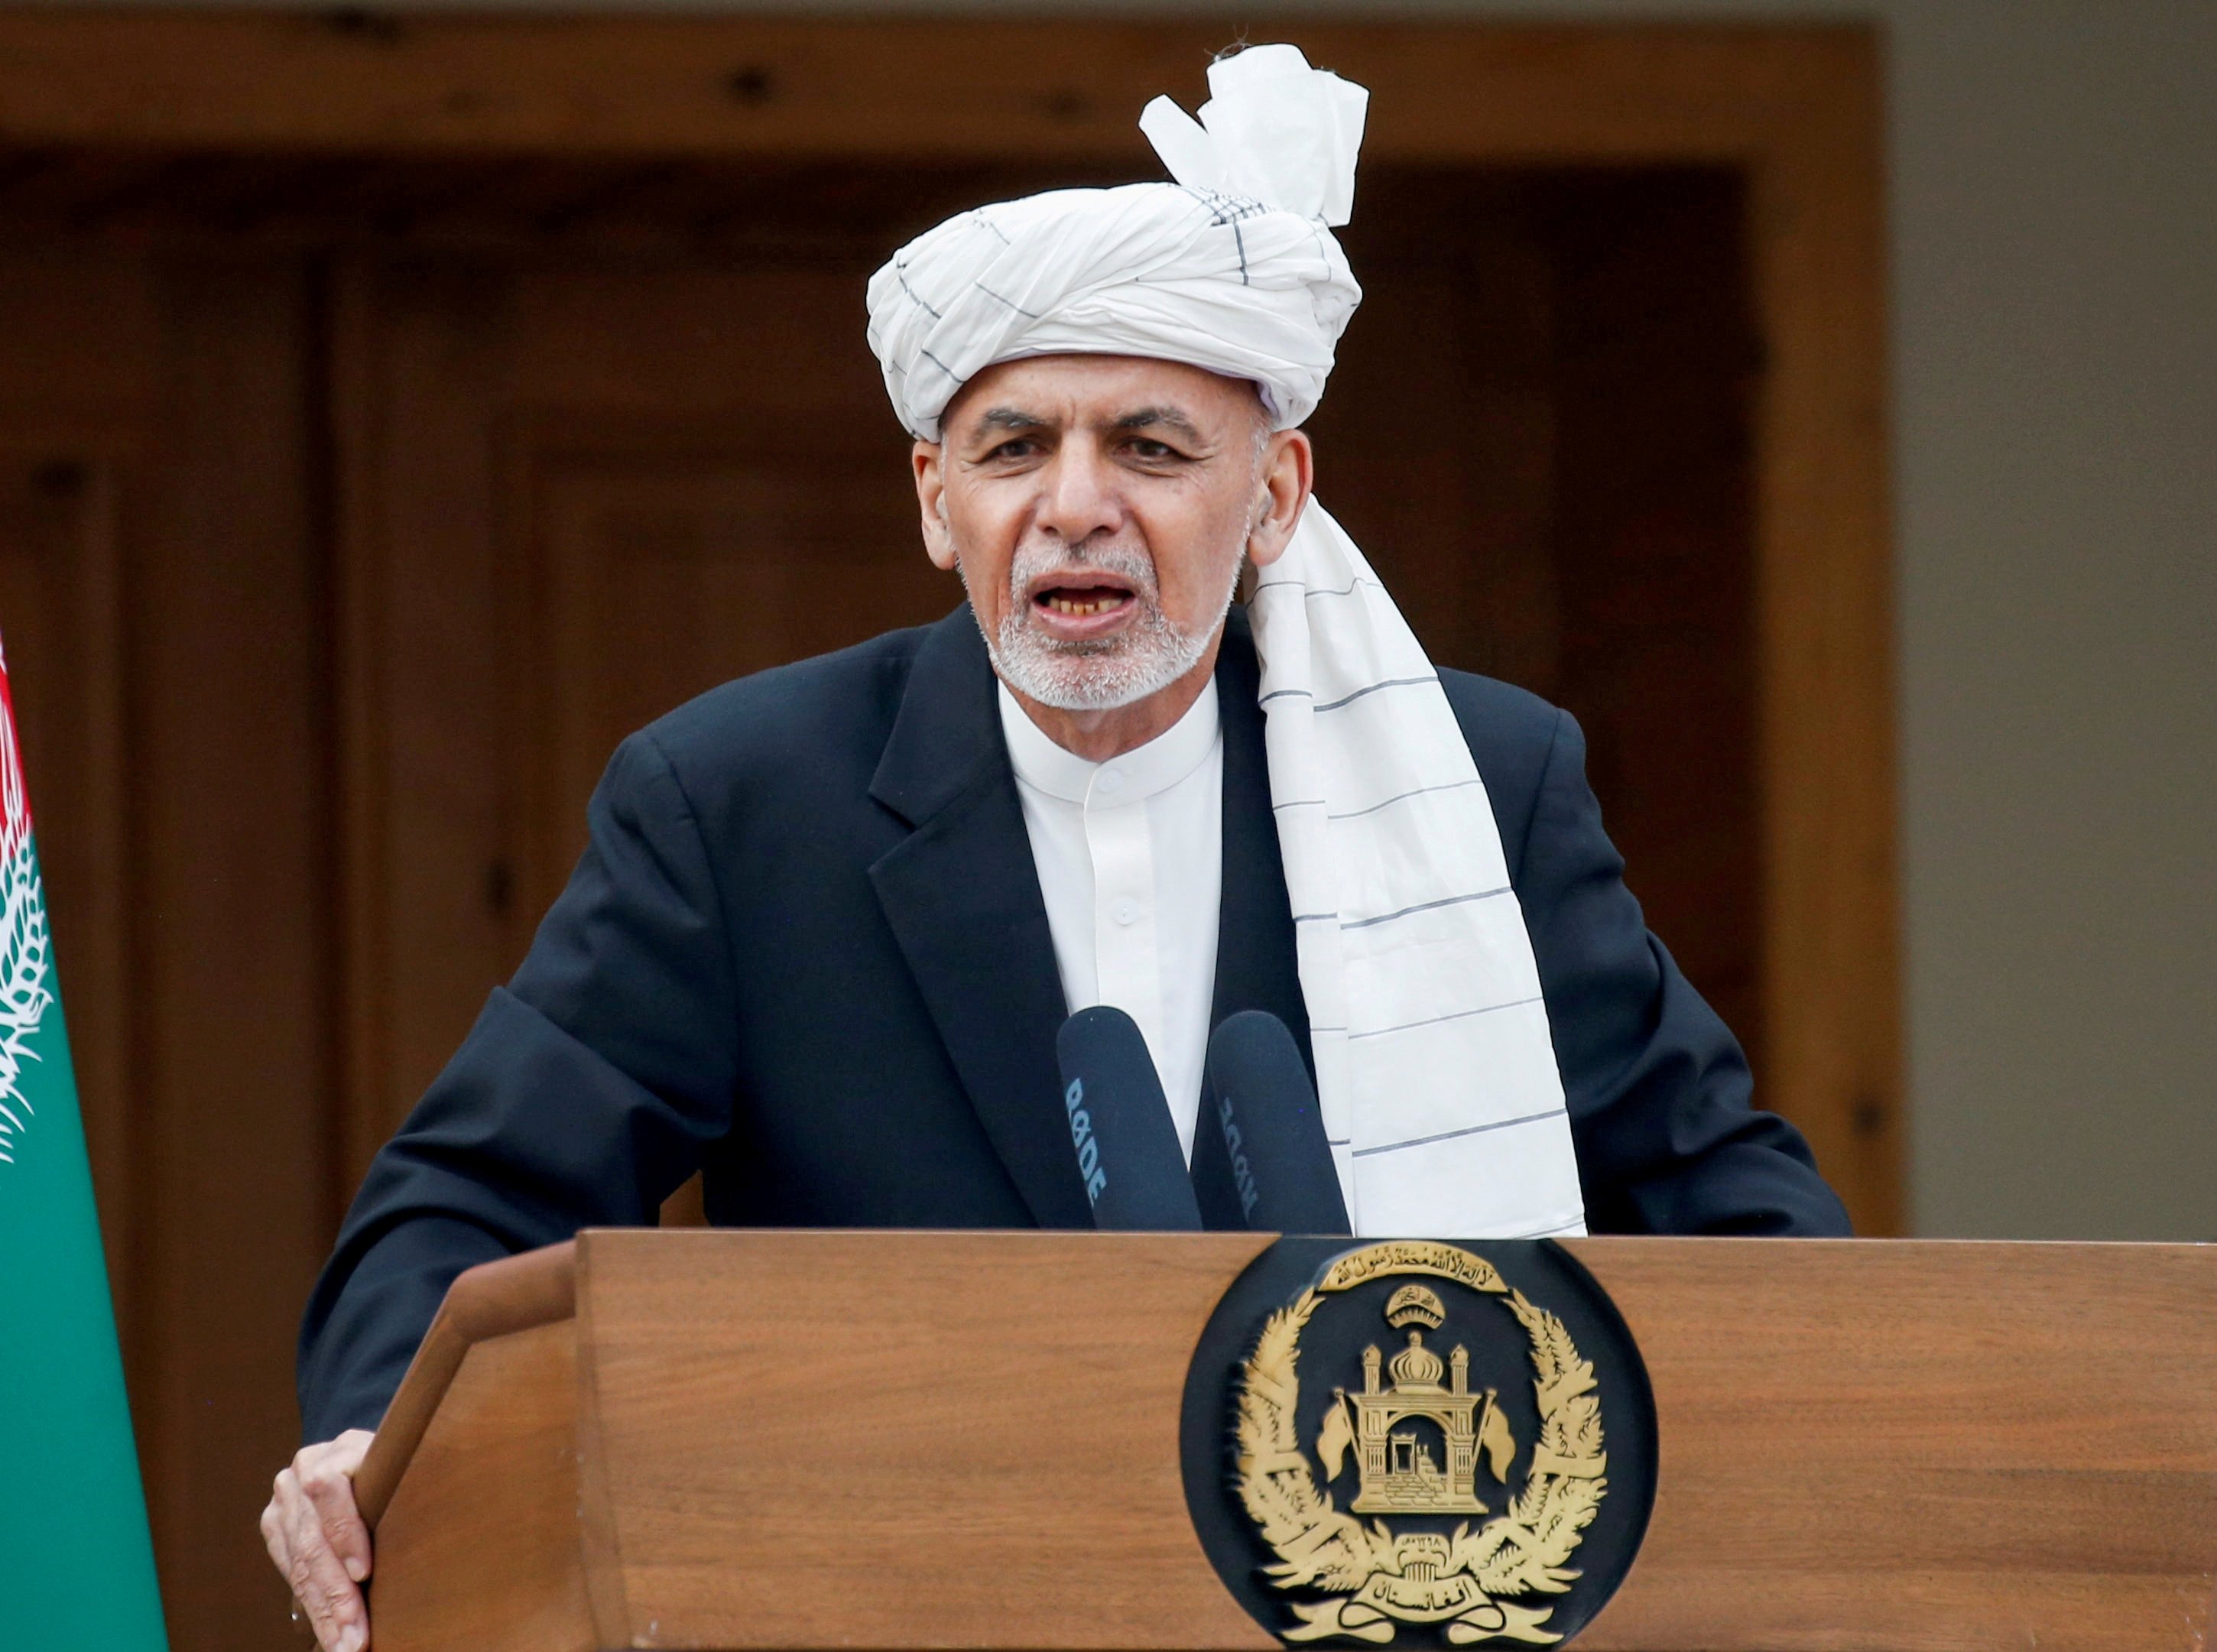 Afghanistan's Ghani to present 3-phase peace roadmap in Turkey | Daily Sabah